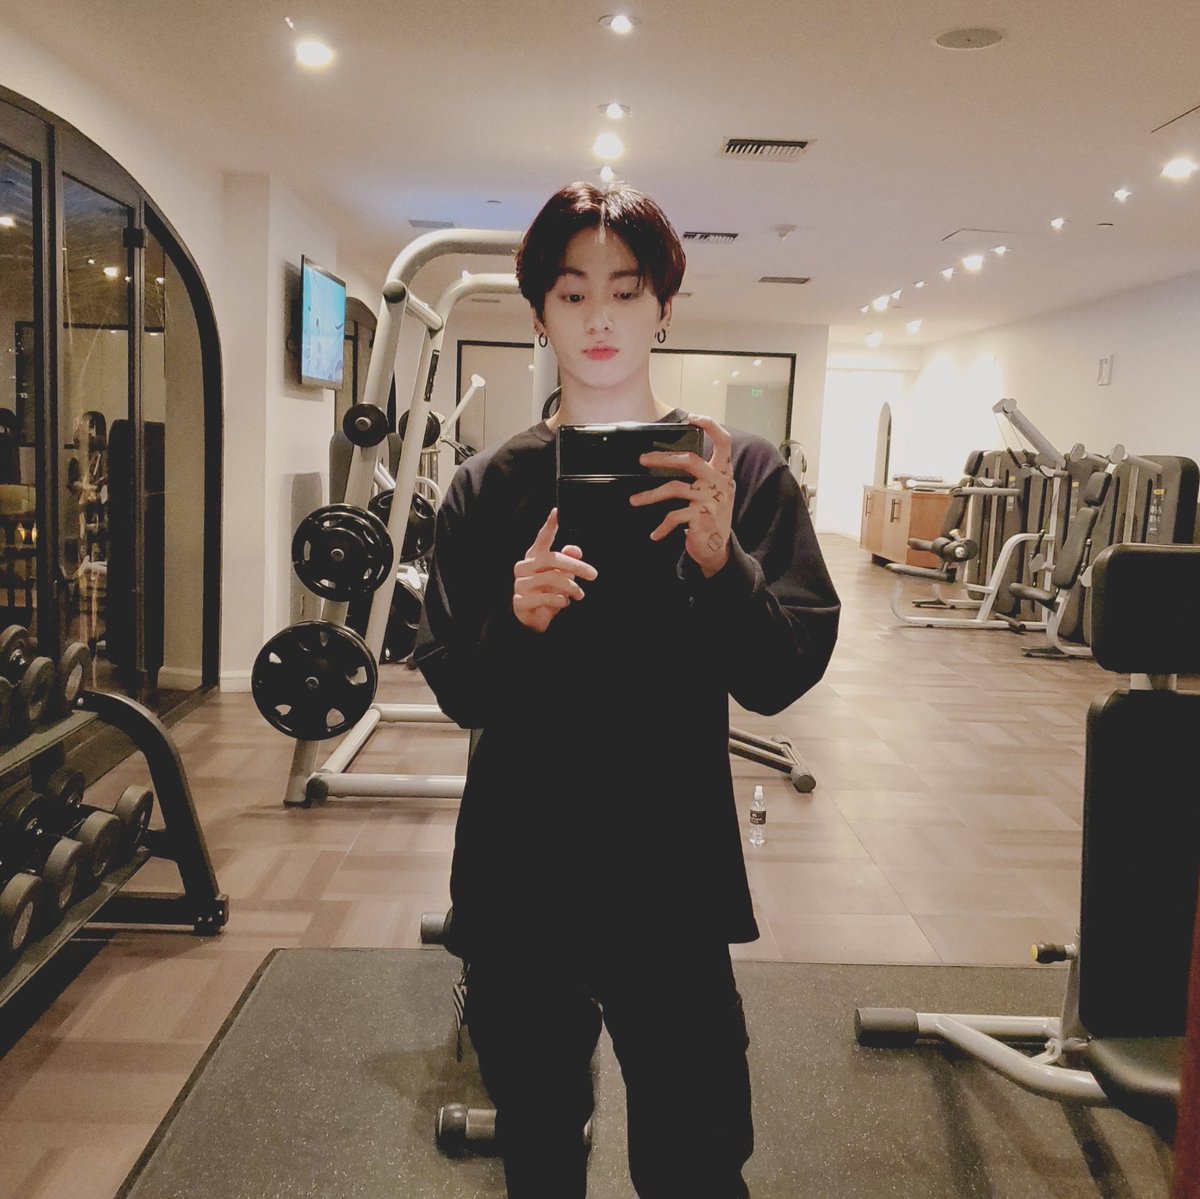 mirror selcas after working hard